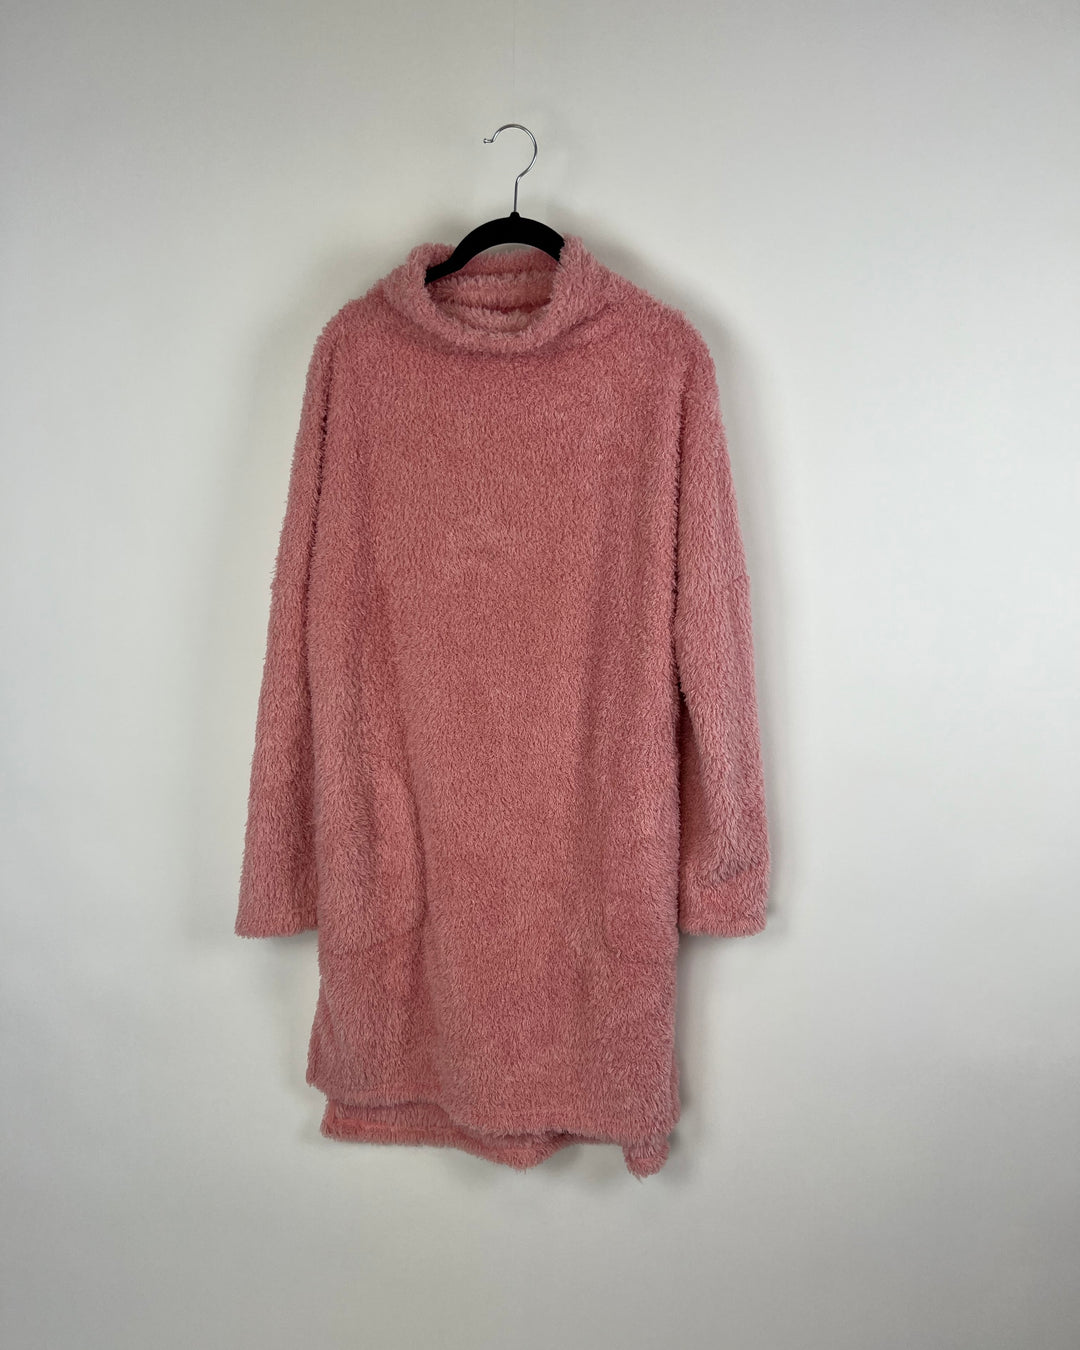 Oversized Pink Cozy Top - Small